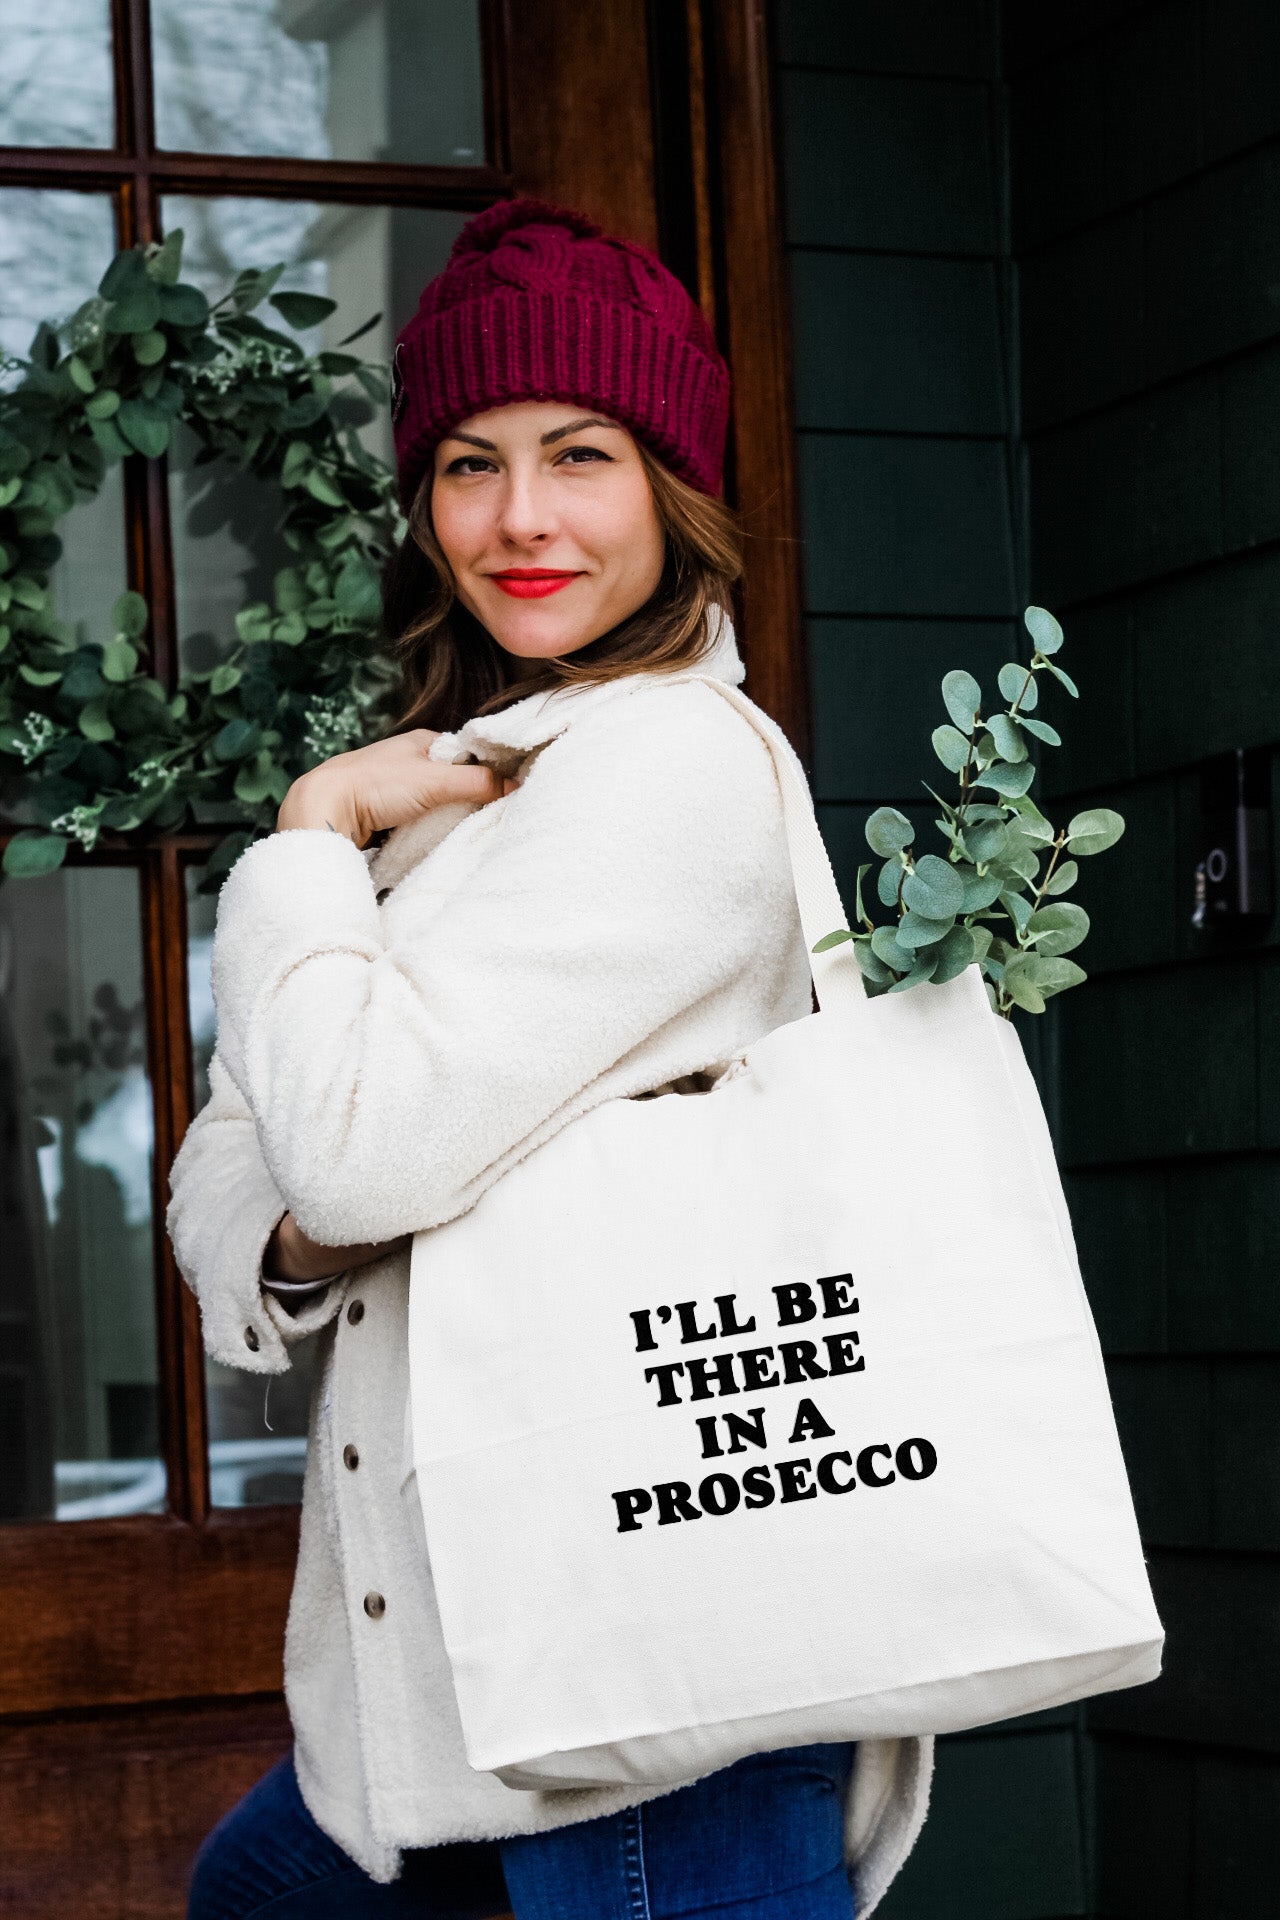 I'll Be There In A Prosecco - Tote Bag - MoonlightMakers